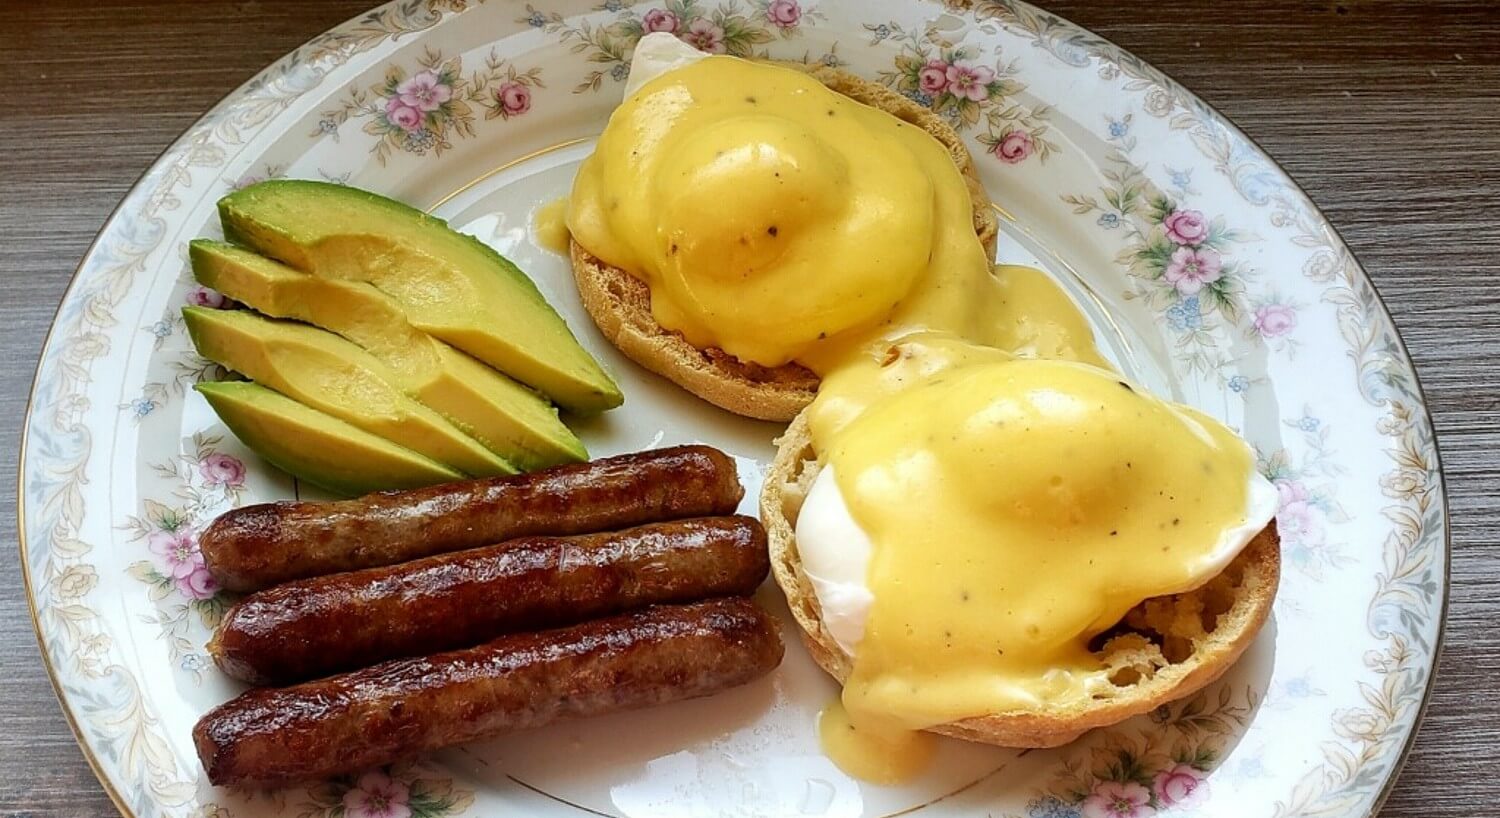 Floral china plate with eggs benedict, sausage links and avocado slices